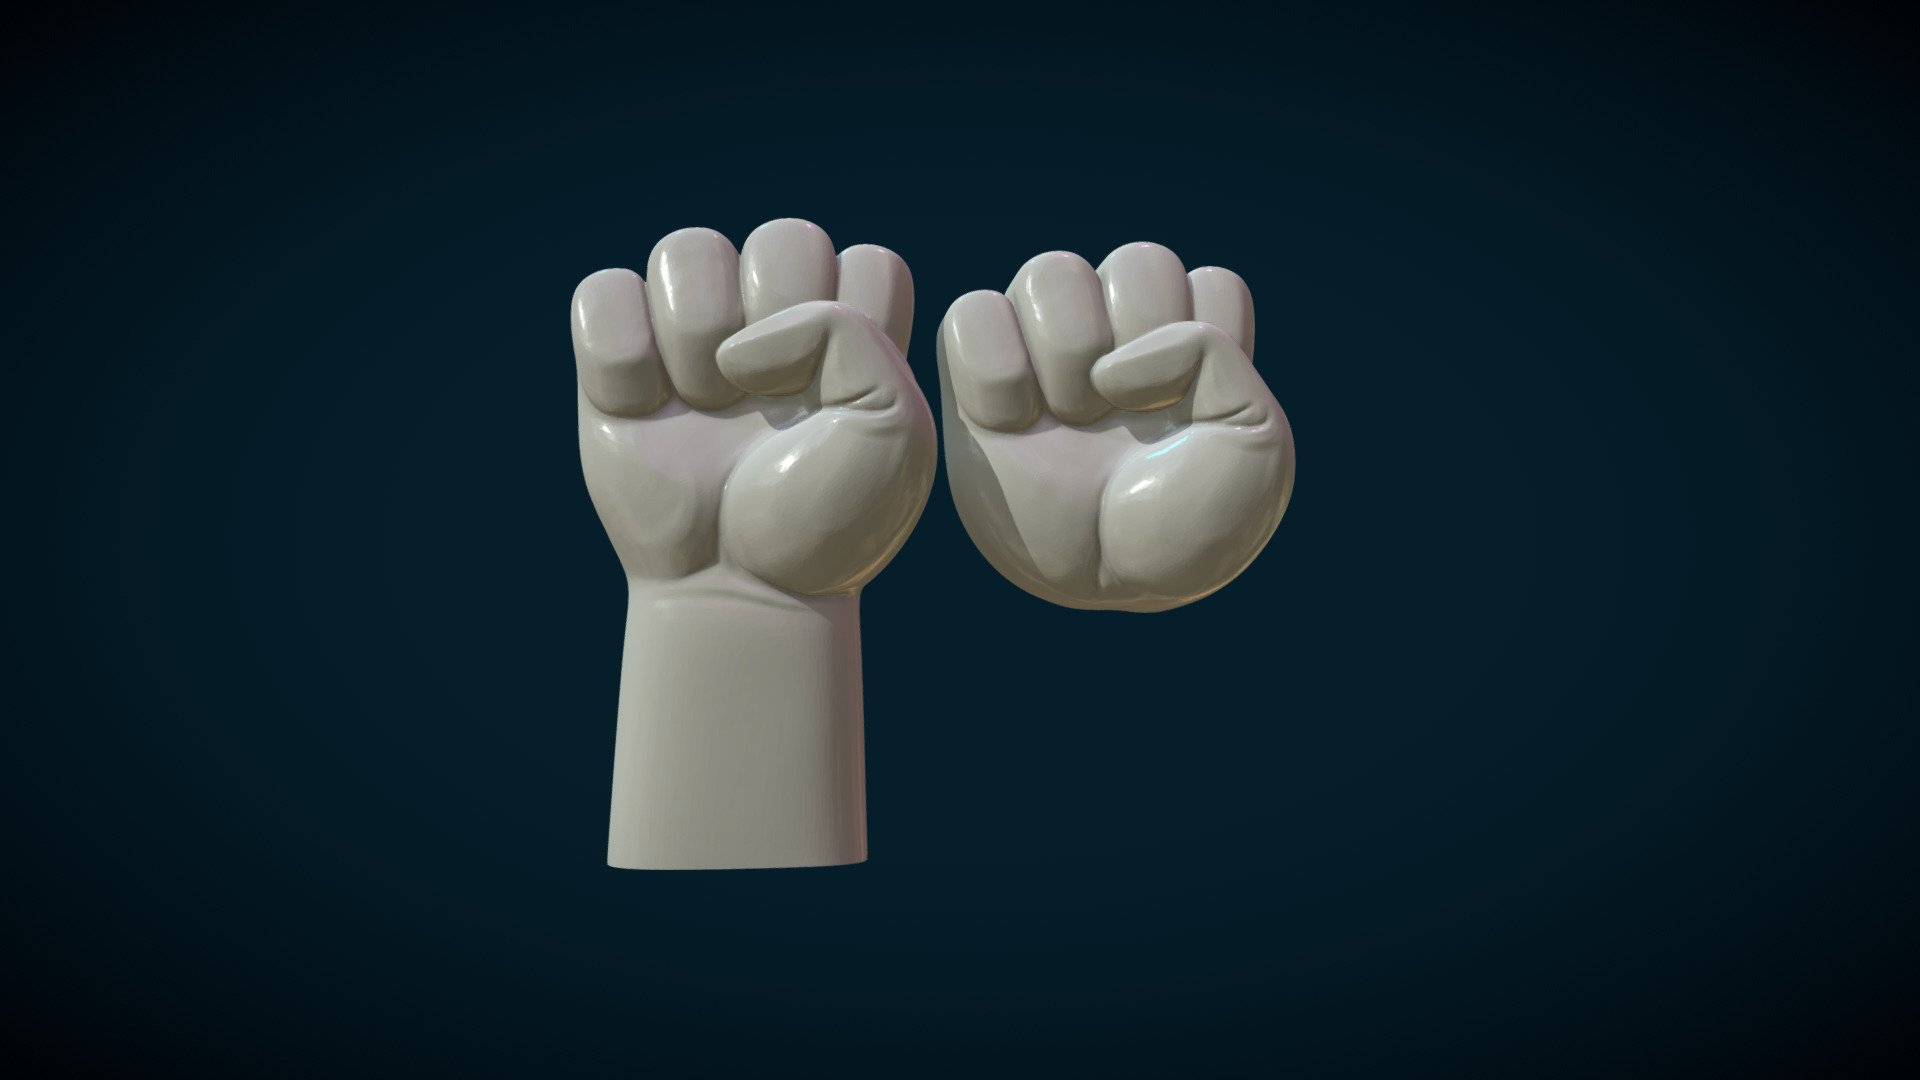 Print ready fist relief.

Measure units are millimeters, the fist itself (without arm) is about 2 cm in height.

Mesh is manifold, no holes, no inverted faces, no bad contiguous edges.

Here is two version of the model:

1) Fist_Relief. (.blend, .fbx, .obj, .stl, .dae) The file contains the fist without an arm. The model consists of 39748 triangular faces.

2) Fist_Relief_A. (.blend, .fbx, .obj, .stl, .dae) The file contains the fist with the arm. The model consists of 4190 triangular faces.  

Available formats: .blend, .stl, .obj, .fbx, .dae - Fist Hand relief - Buy Royalty Free 3D model by Skazok 3d model